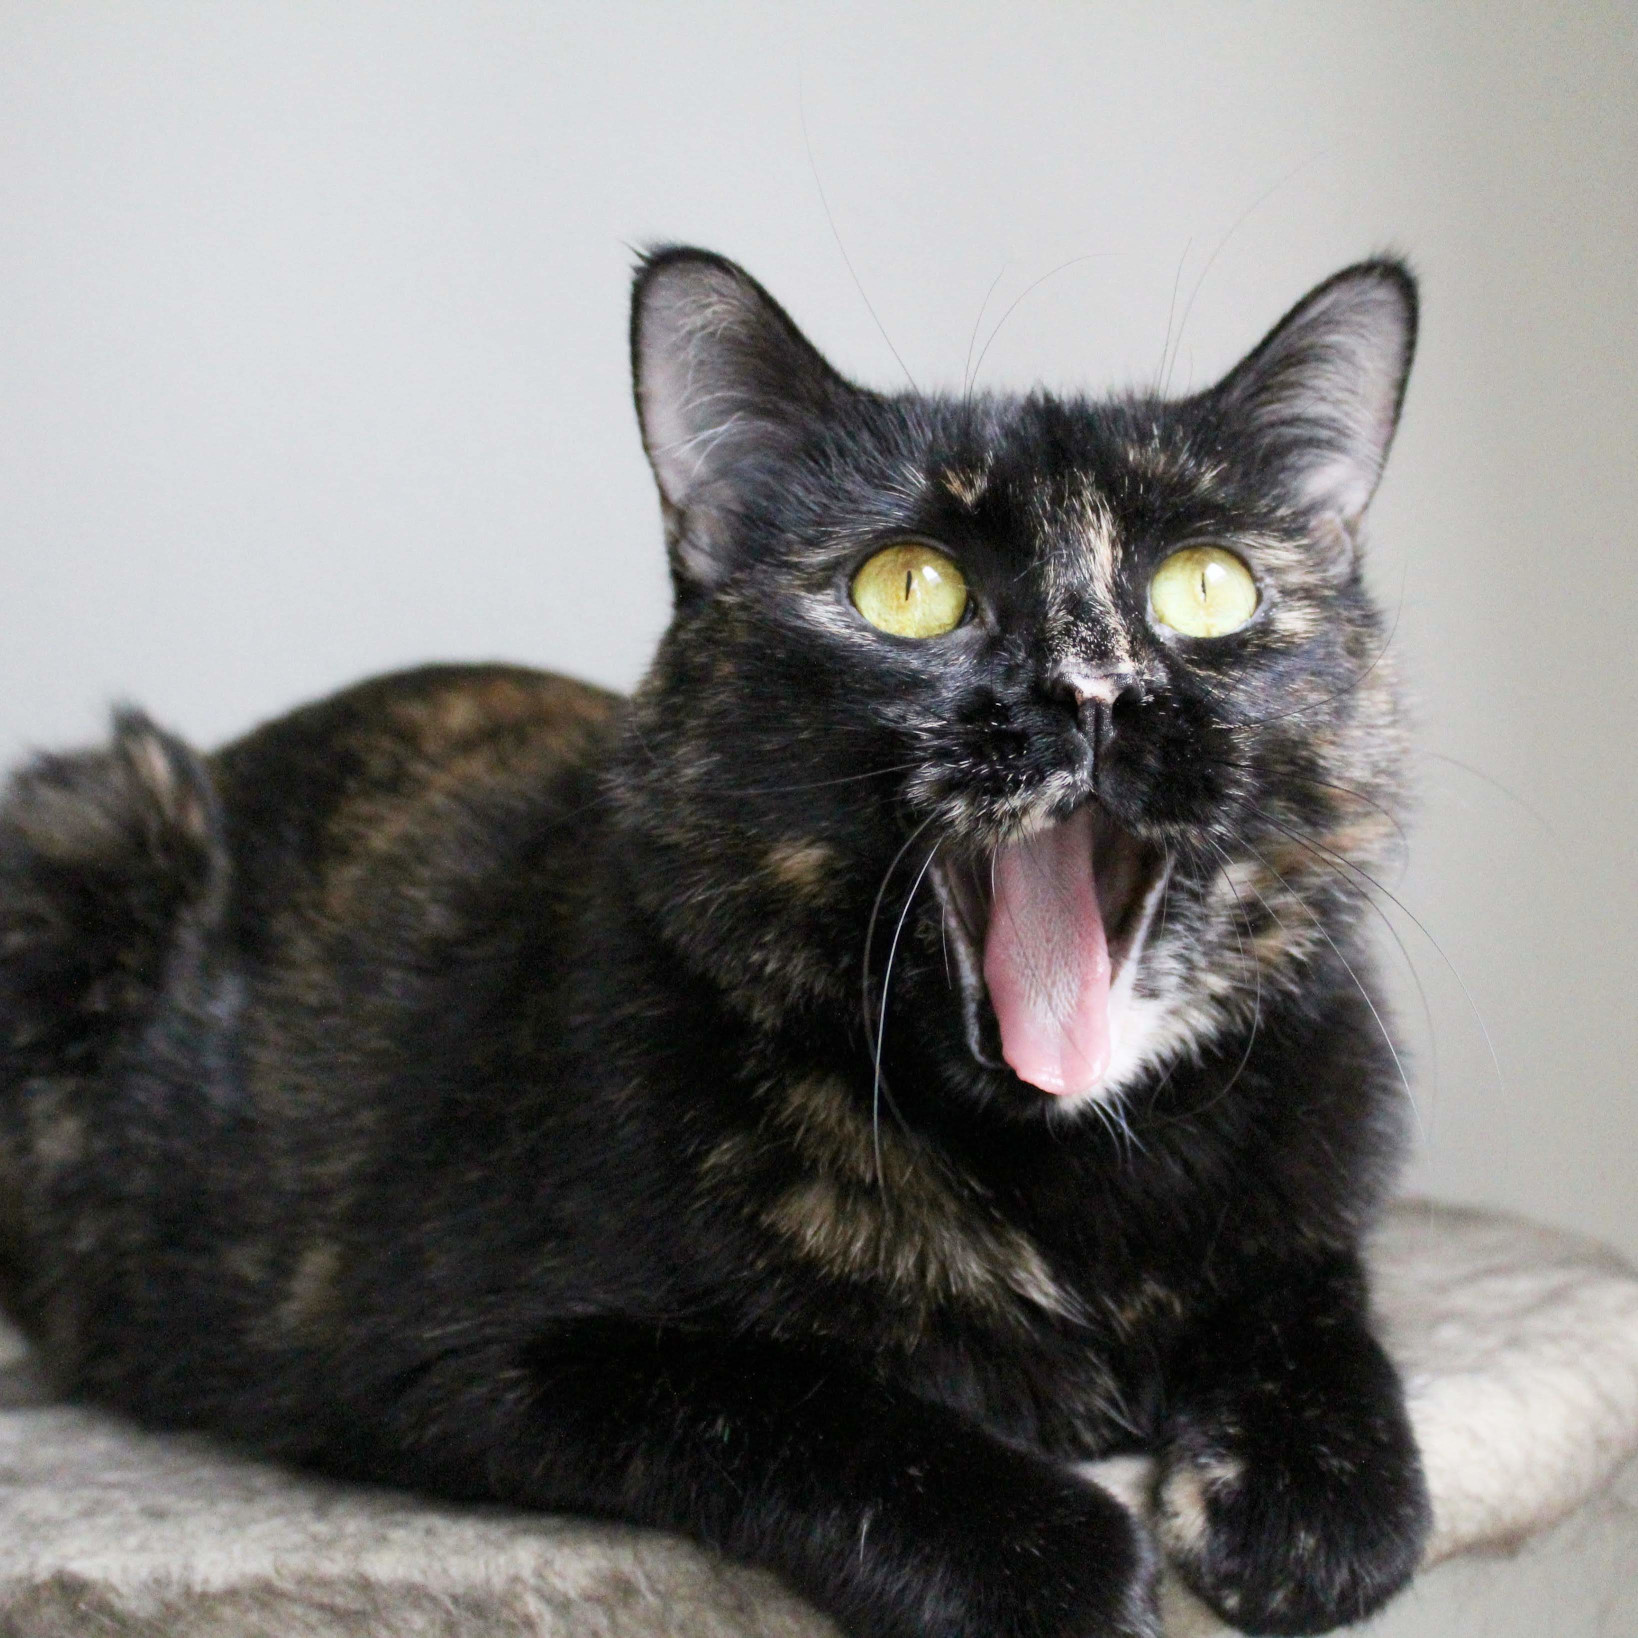 Image of tortoiseshell cat perched on a cat tree yawning in a way that make it look as though it is smiling excitedly